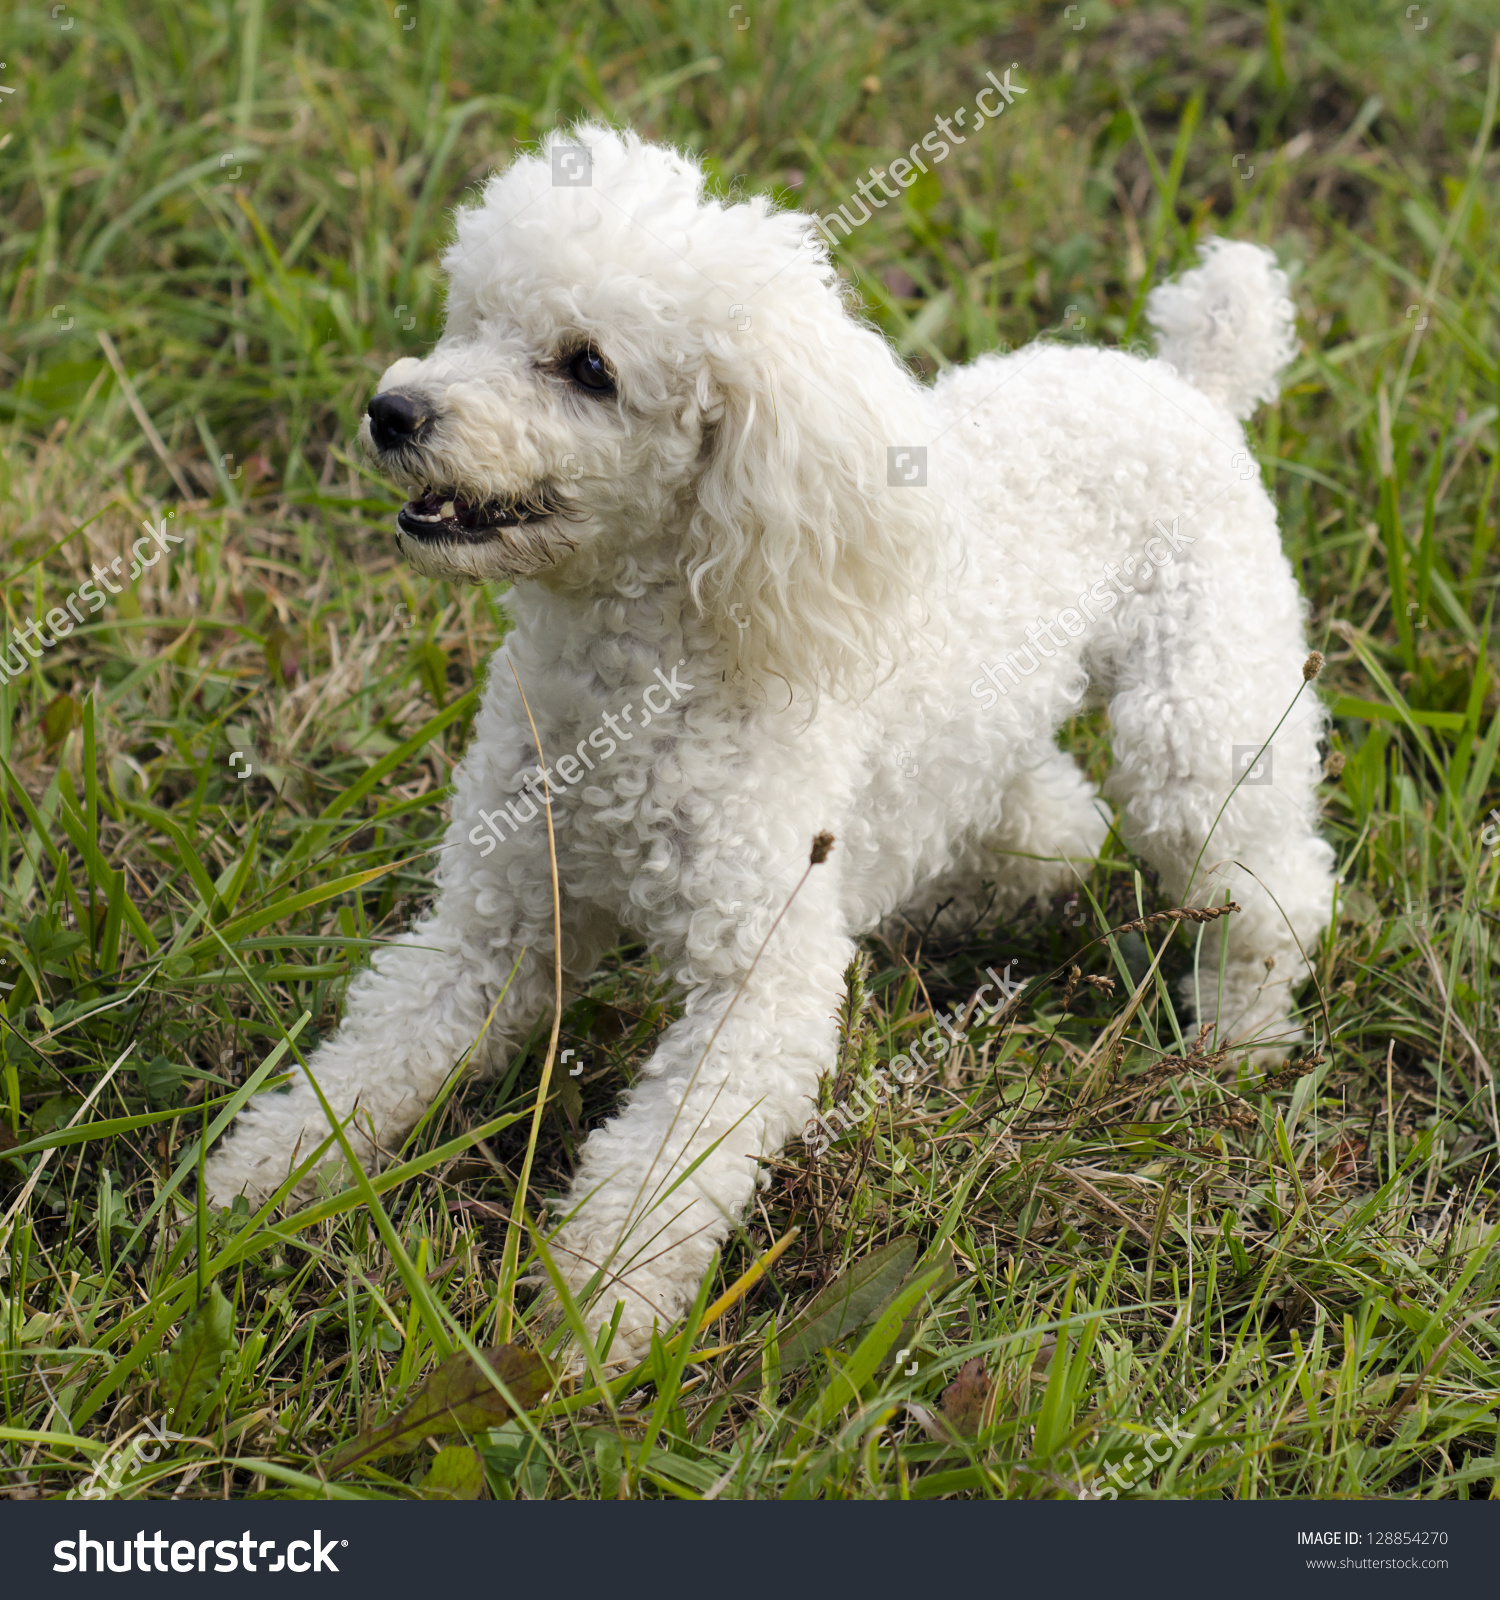 White Poodle Dog Playing In Lawn